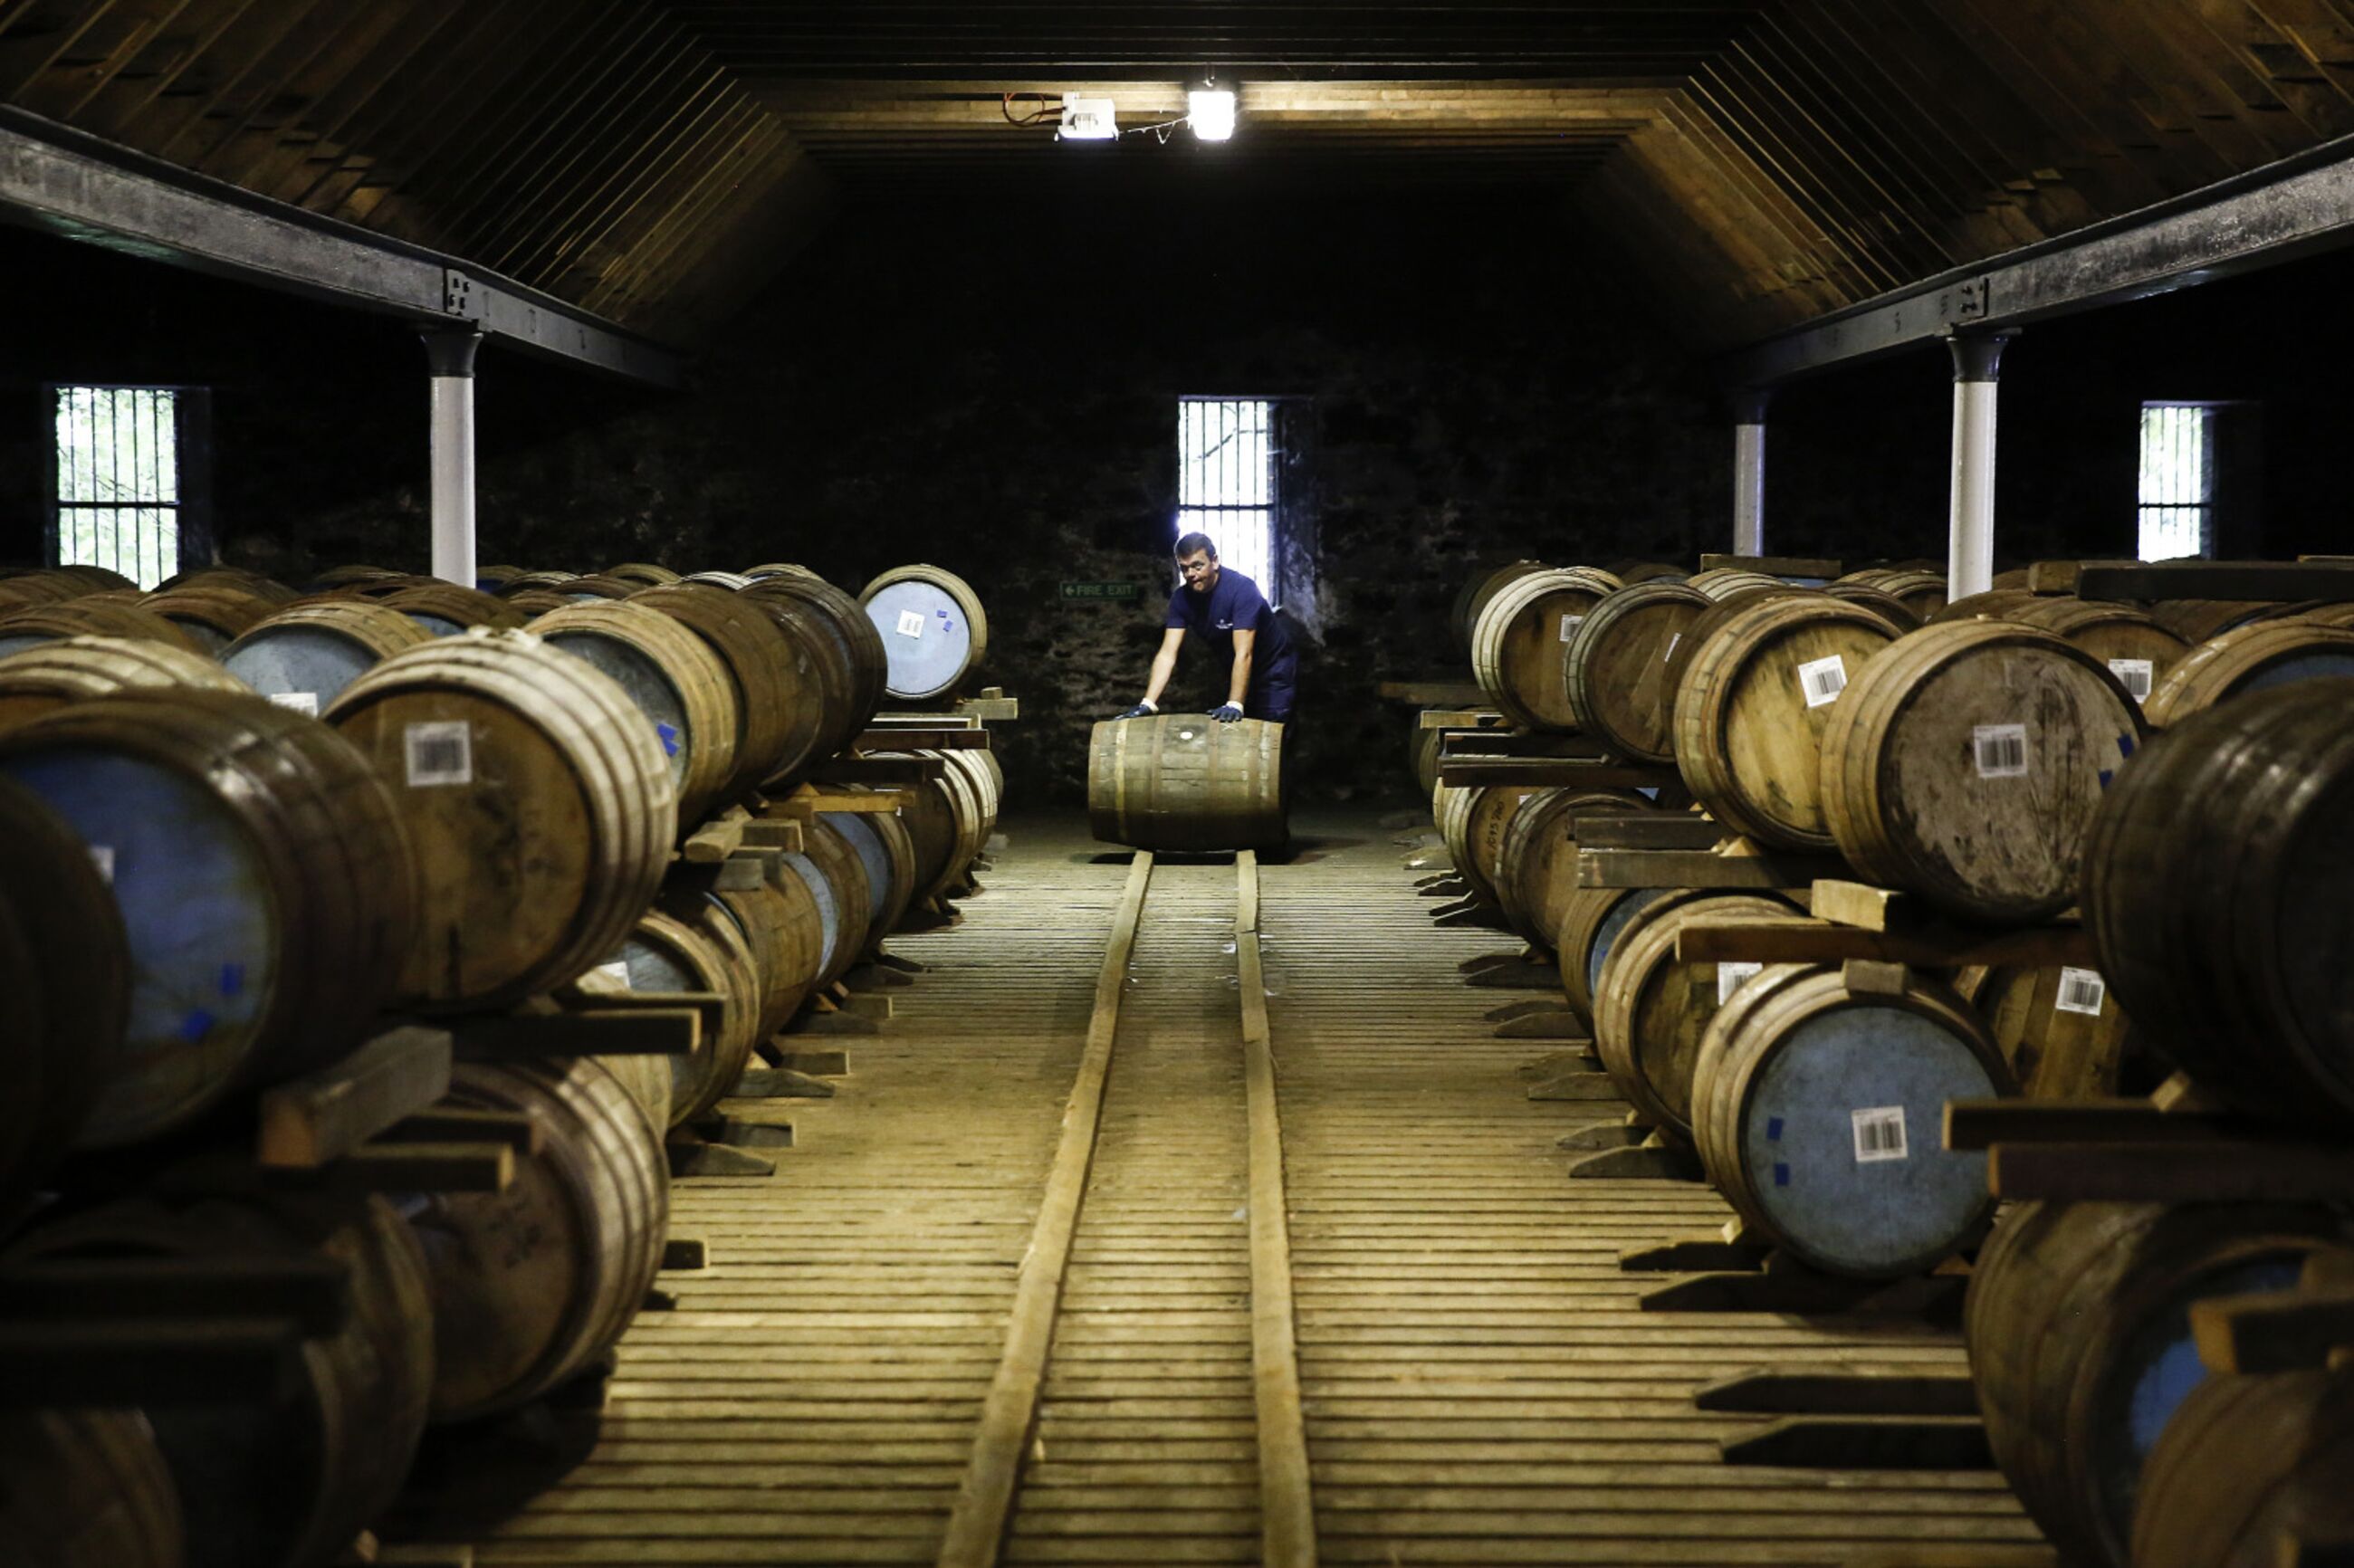 Scotch Whisky Production At Pernod Ricard SA Distilleries Ahead Of Scottish Referendum